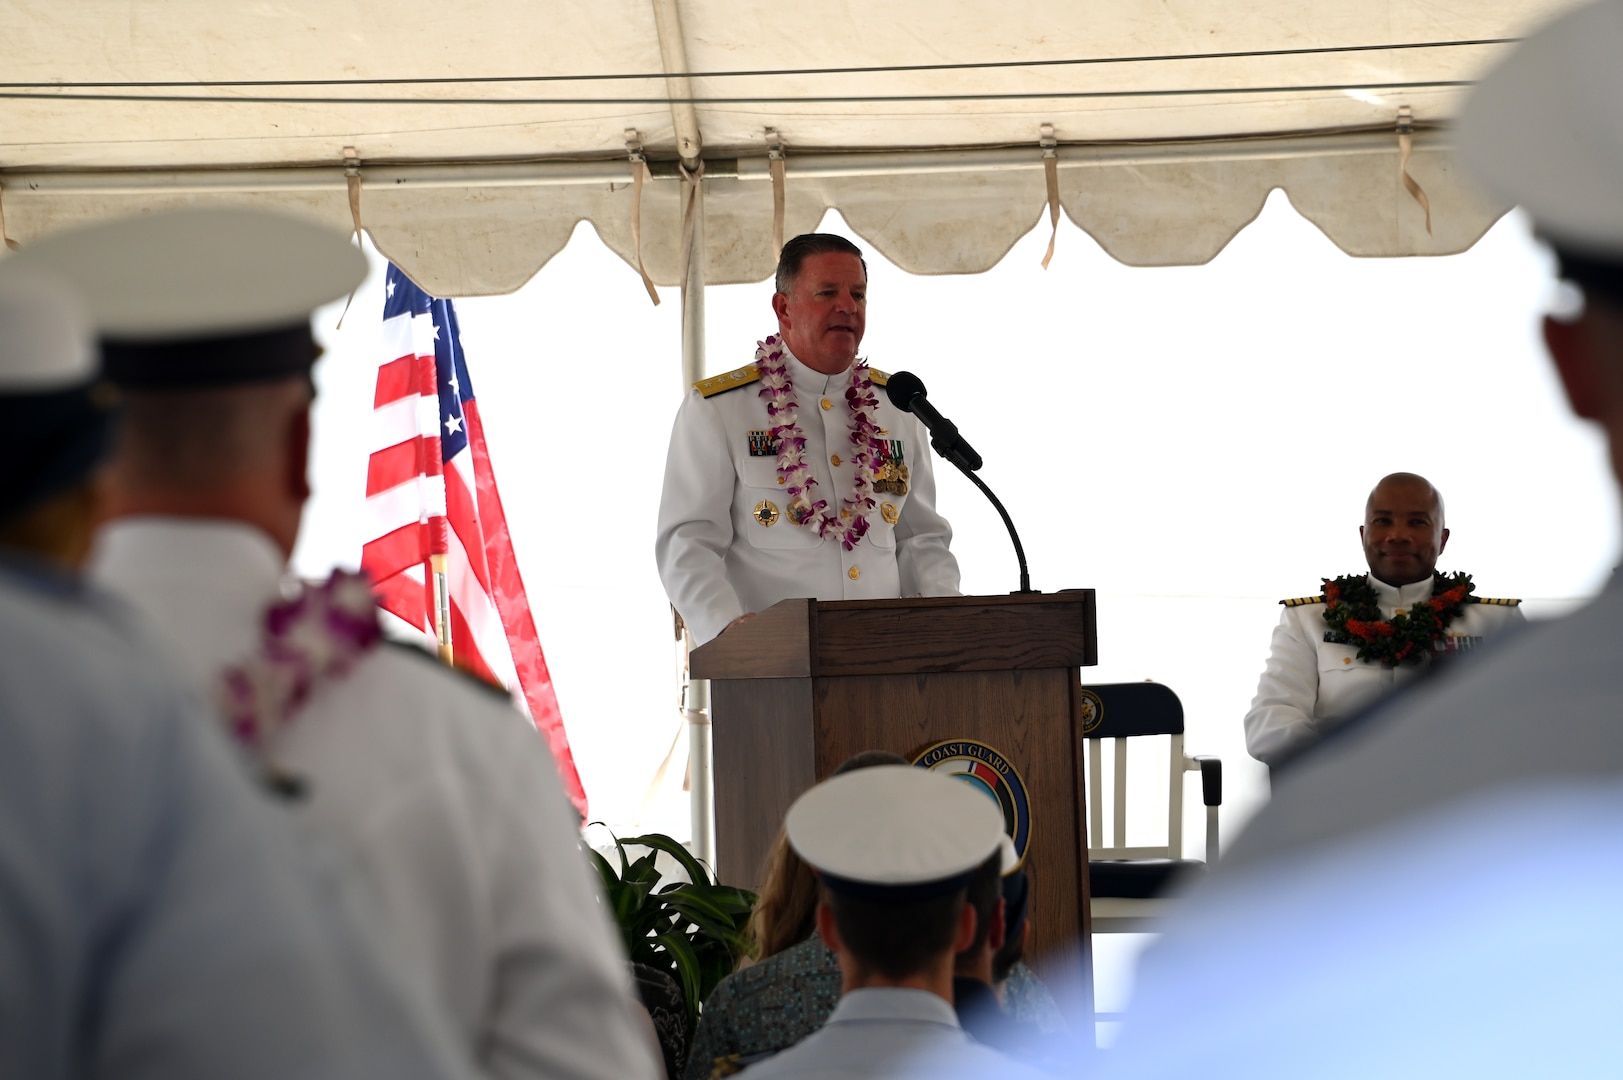 Rear Adm. Brendan C. McPherson, deputy commander of U.S. Coast Guard Pacific Area, speaks during the U.S. Coast Guard Cutter Midgett’s (WMSL 757) change of command ceremony on Coast Guard Base Honolulu, July 20, 2023. McPherson presided over the ceremony in which Capt. Matthew Rooney relieved Capt. Willie Carmichael as Midgett’s commanding officer. U.S. Coast Guard photo by Chief Petty Officer Matthew Masaschi.